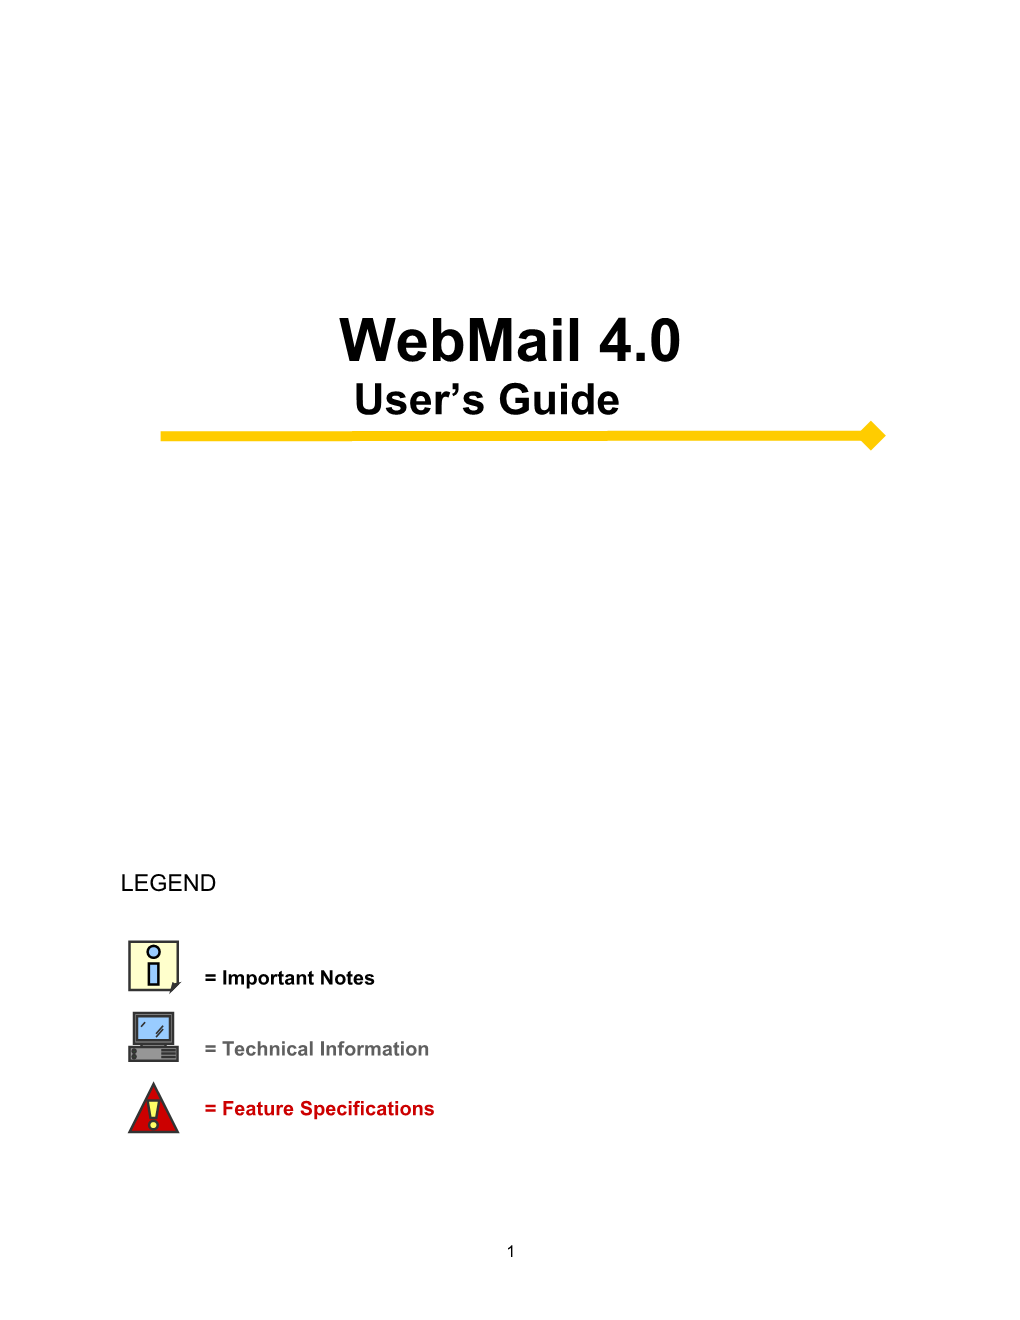 Webmail 4.0 User Guide